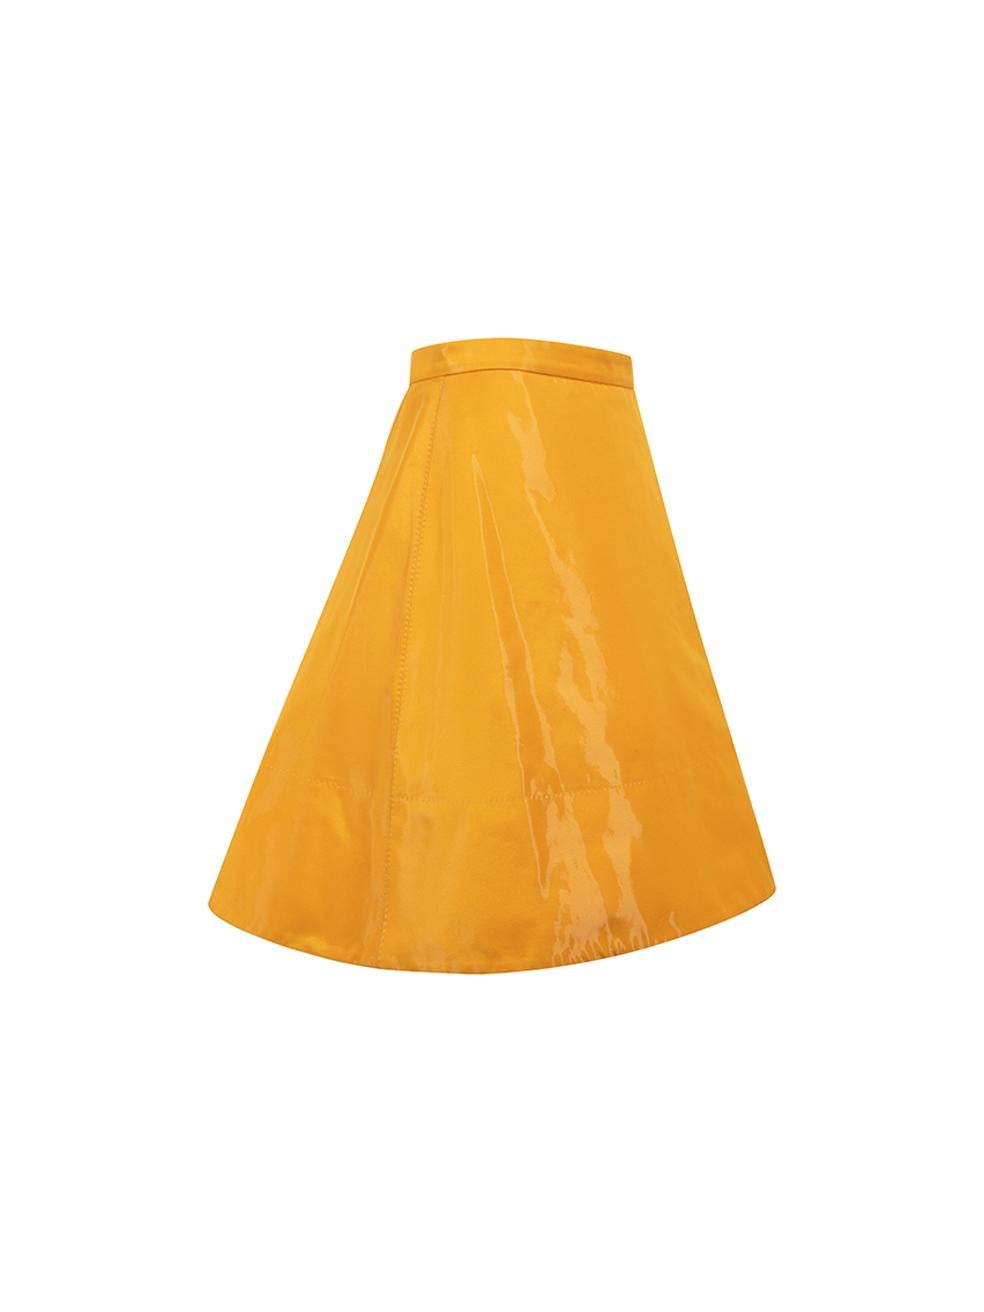 CONDITION is Very good. Minimal wear to skirt is evident. Minimal light marks and scuffs can be seen on this used Louis Vuitton designer resale item.  Details  Orange  Satin Skirt Mini length Flared skater style Side zip fastening with snap button,